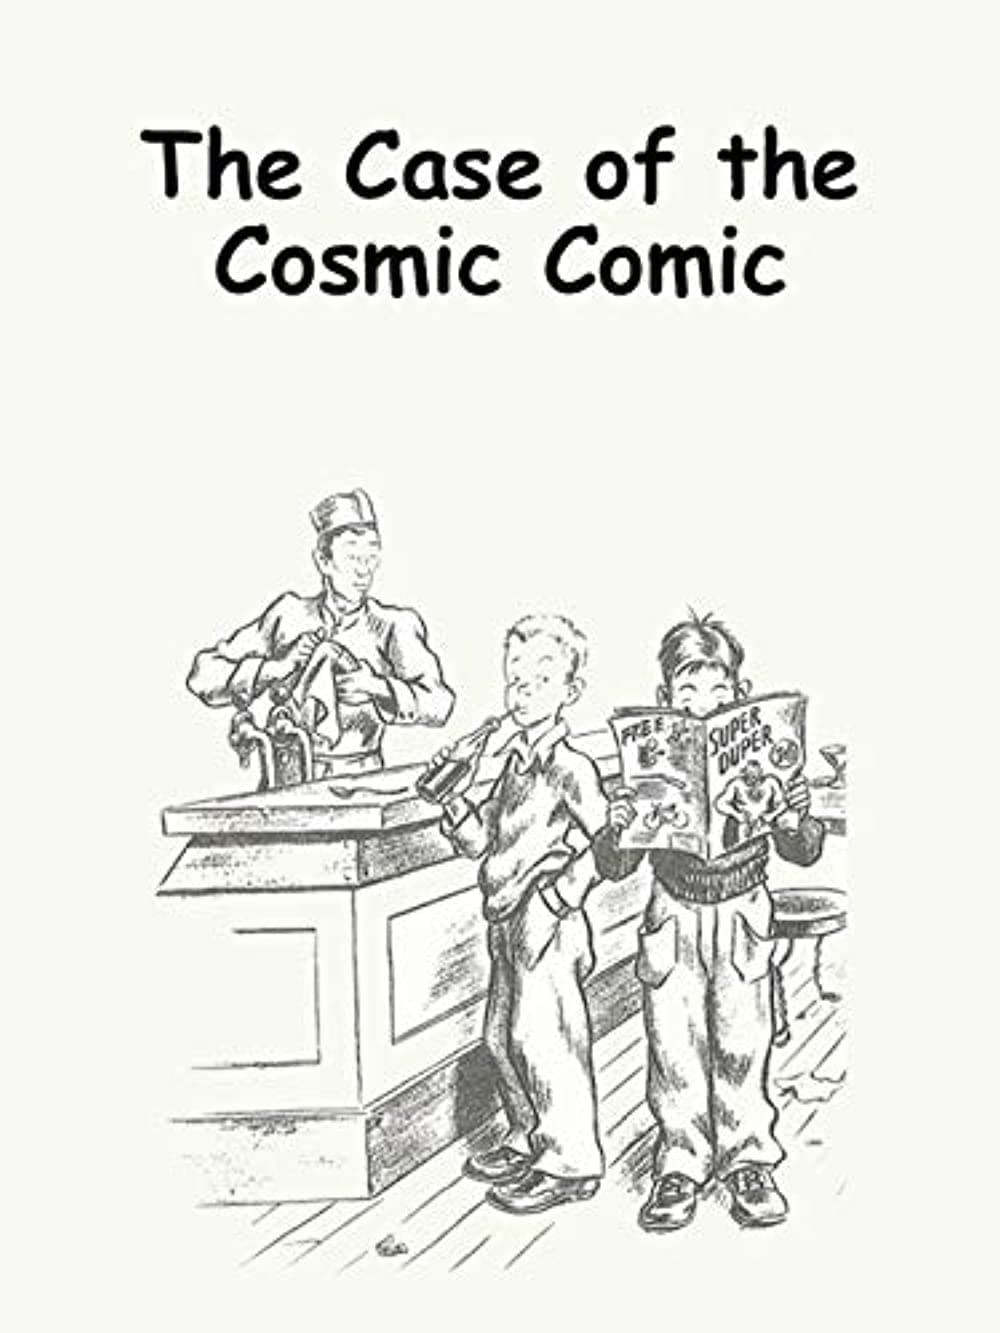 The Case of the Cosmic Comic